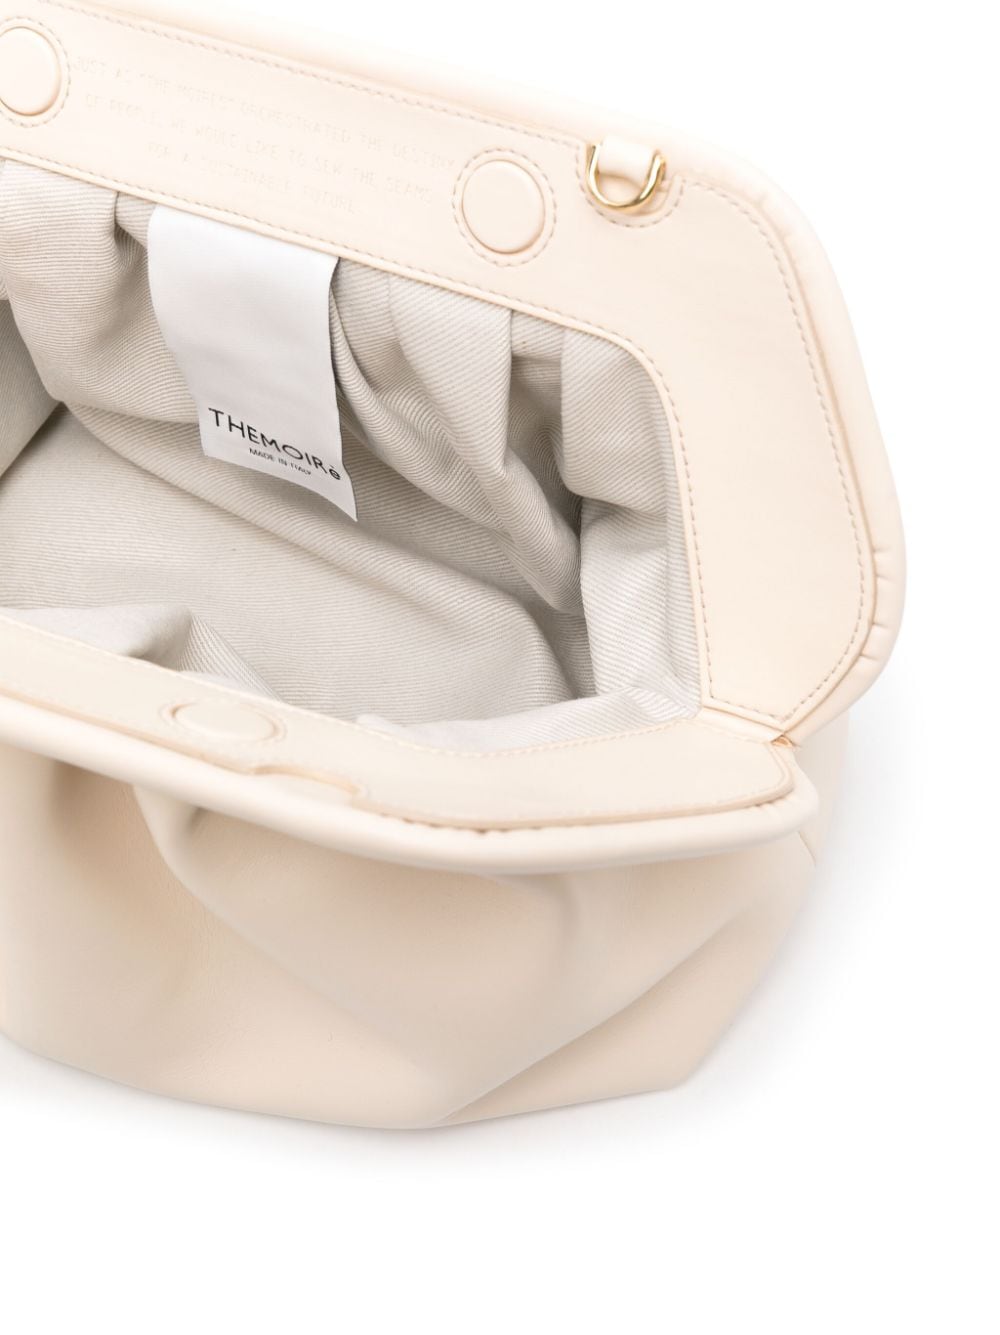 THEMOIRè White Vegan Leather Clutch Handbag with Magnetic Fastening and Detachable Strap